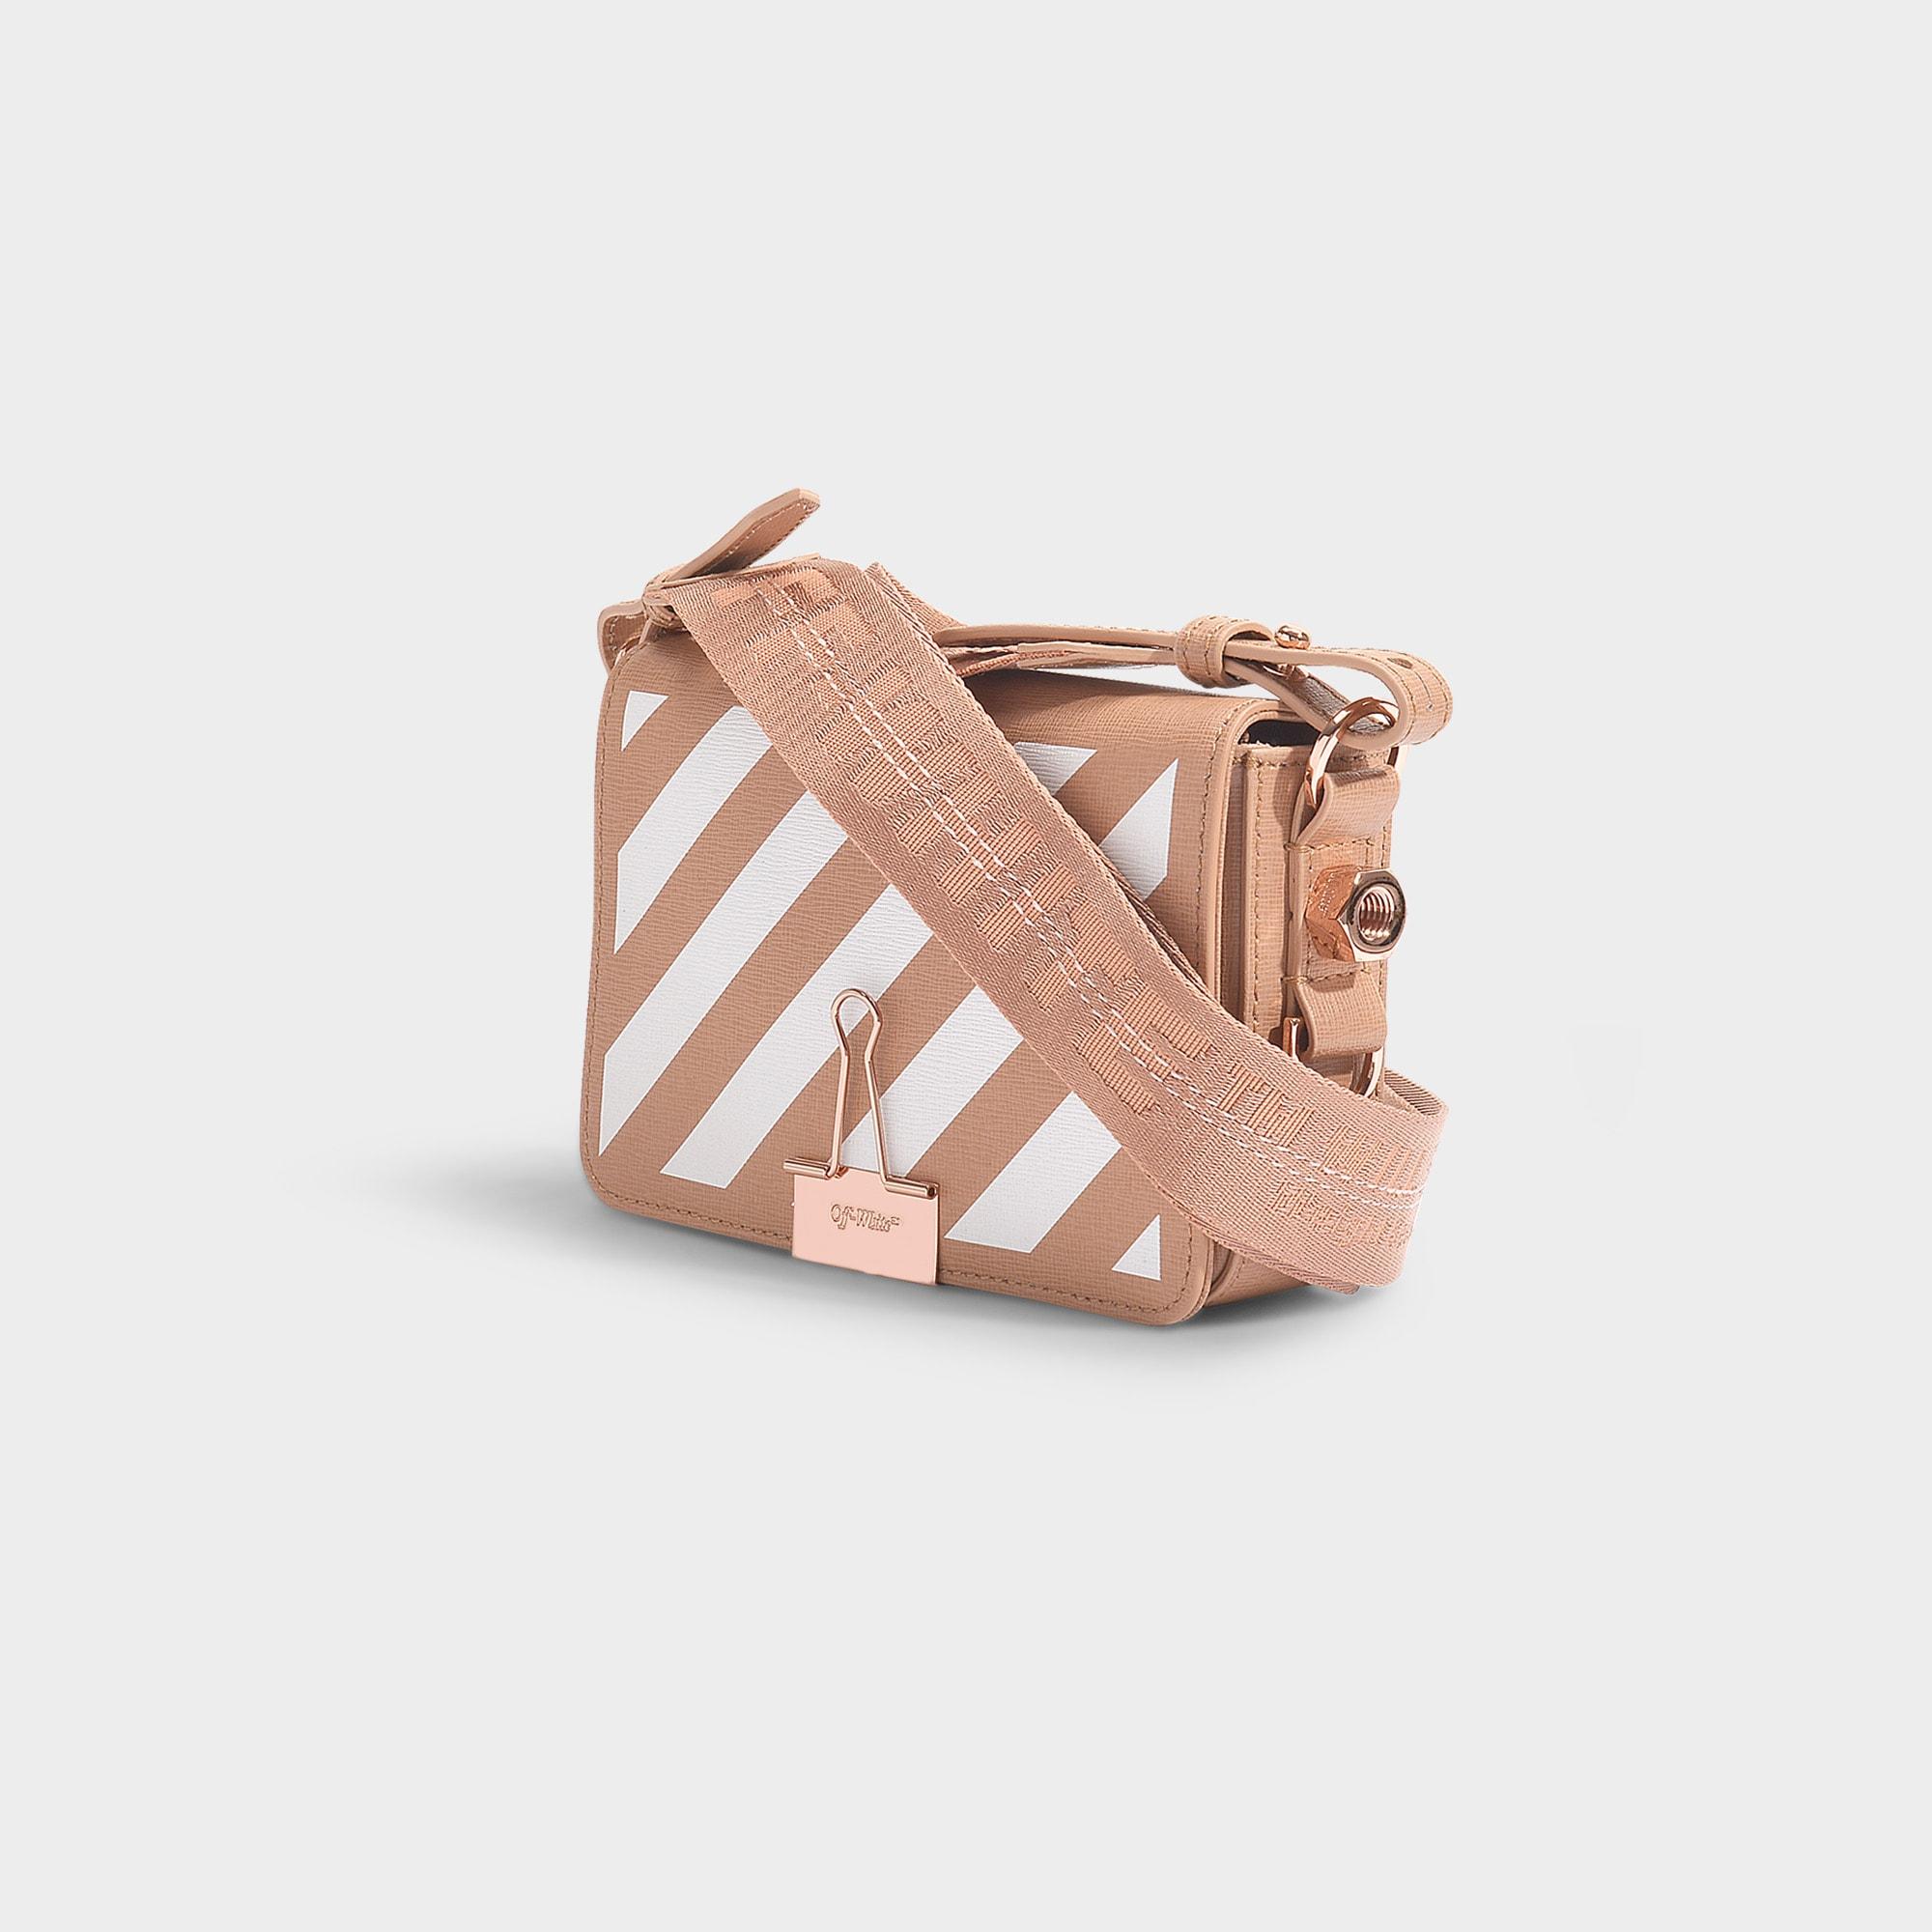 Off-White c/o Virgil Abloh Diag Mini Flap Bag In Nude And White 